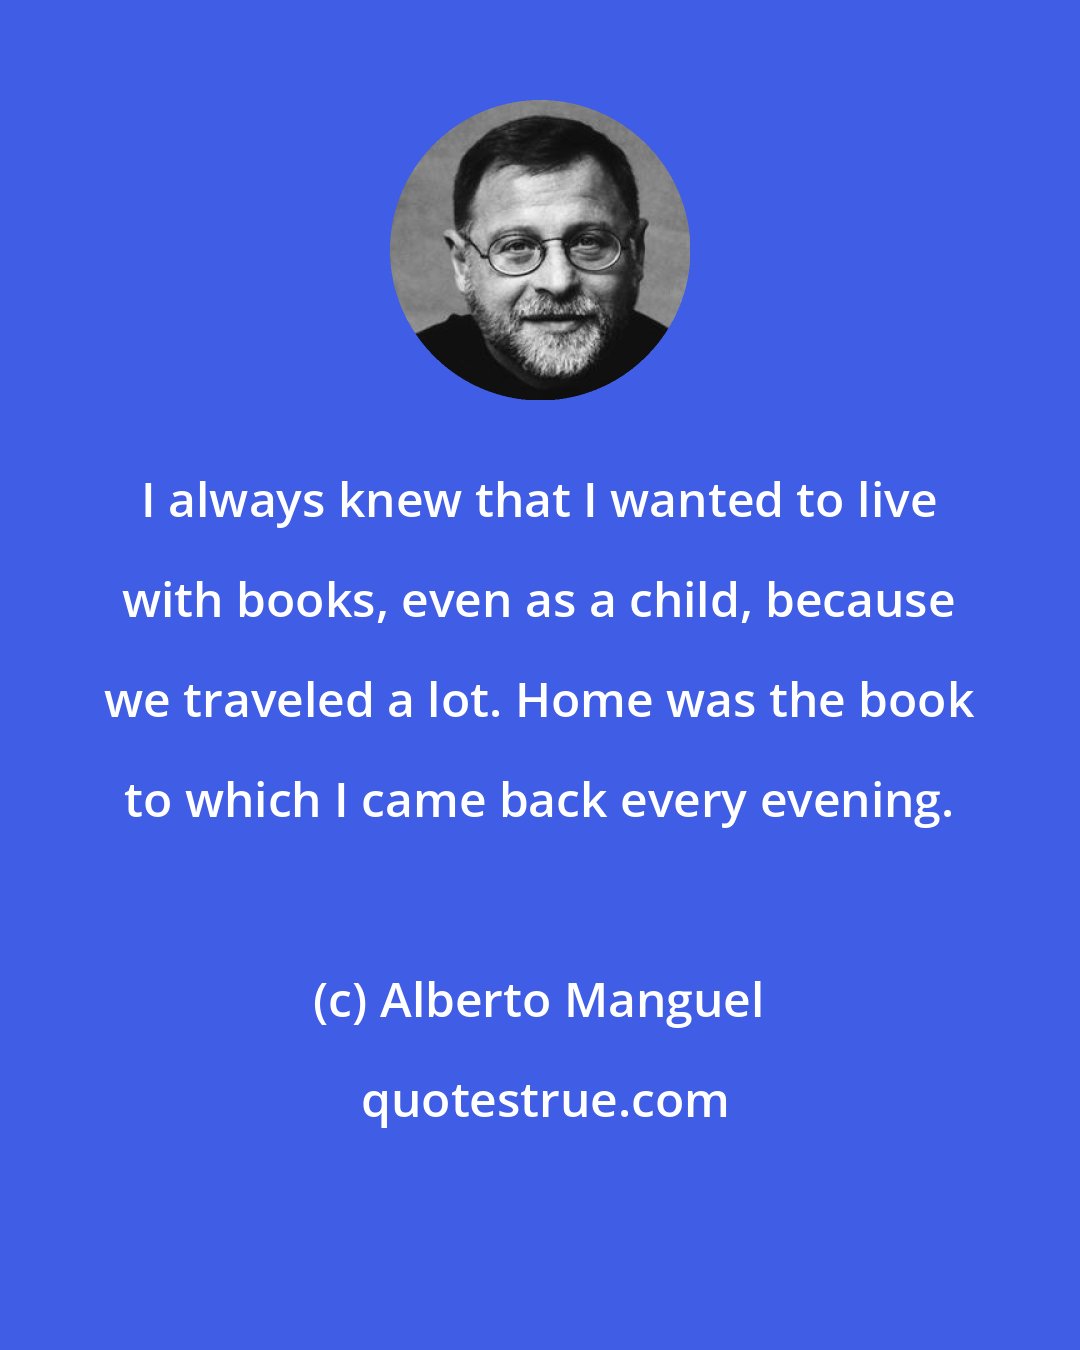 Alberto Manguel: I always knew that I wanted to live with books, even as a child, because we traveled a lot. Home was the book to which I came back every evening.